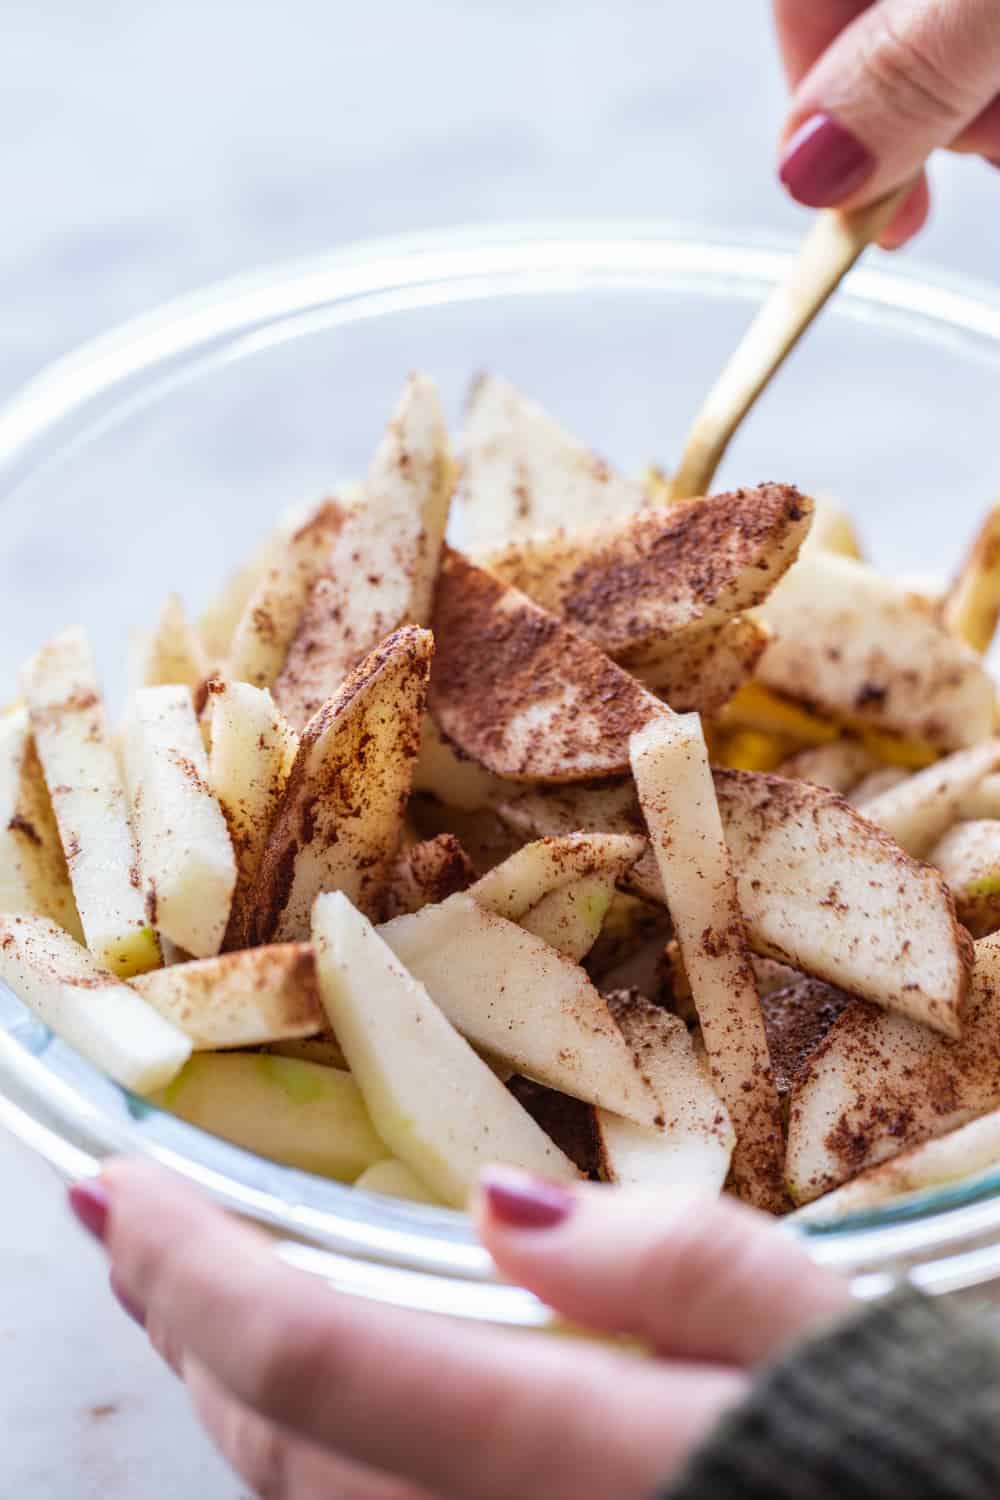 Spoon stirring sliced apples with spice blend in a glass mixing bowl